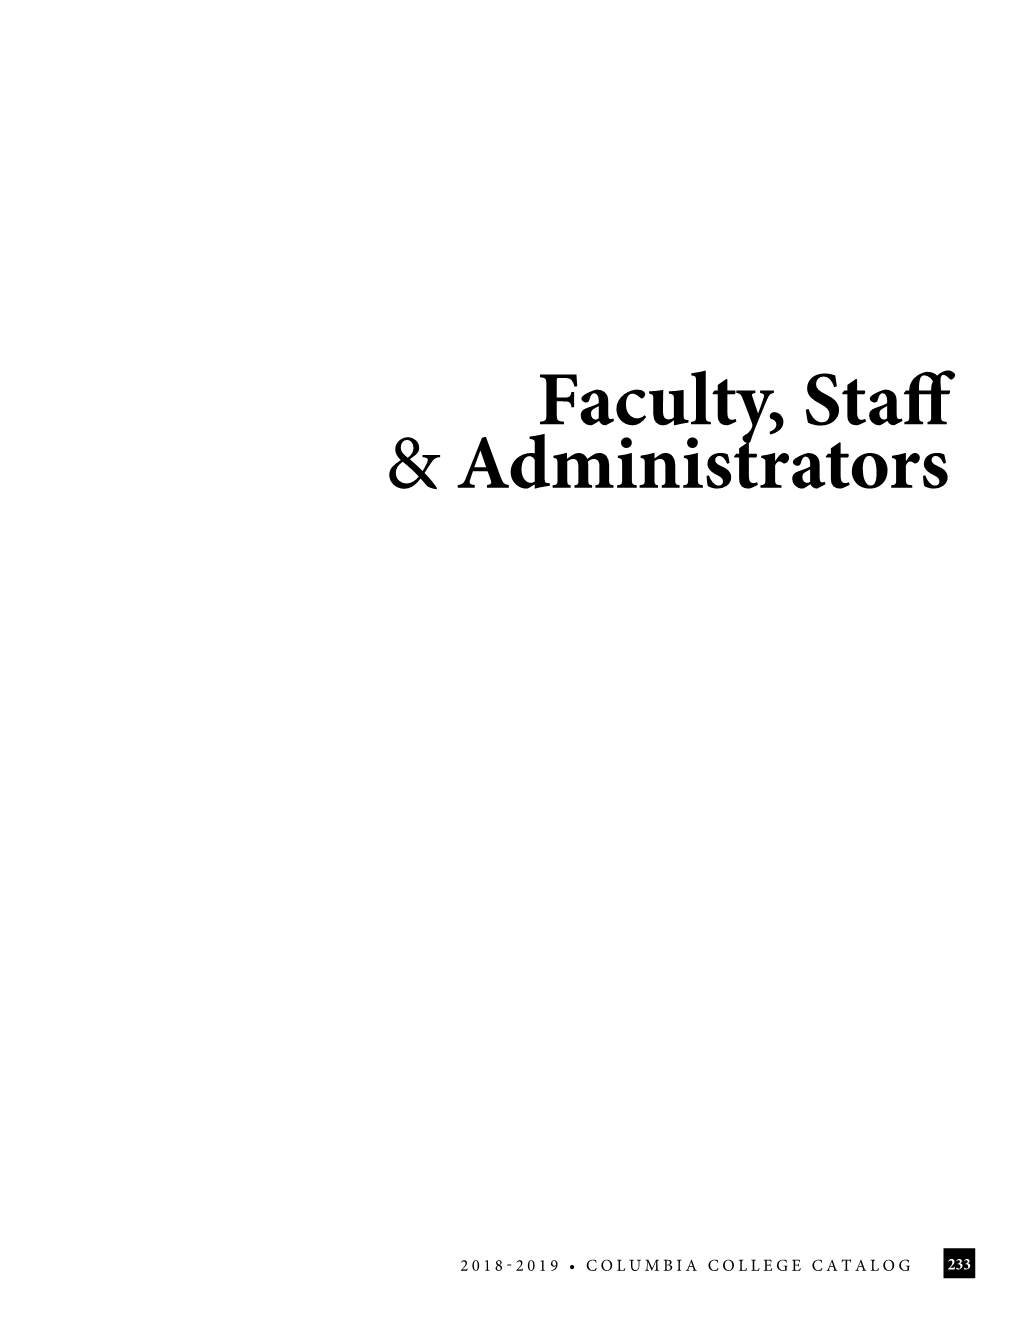 Faculty, Staff & Administrators